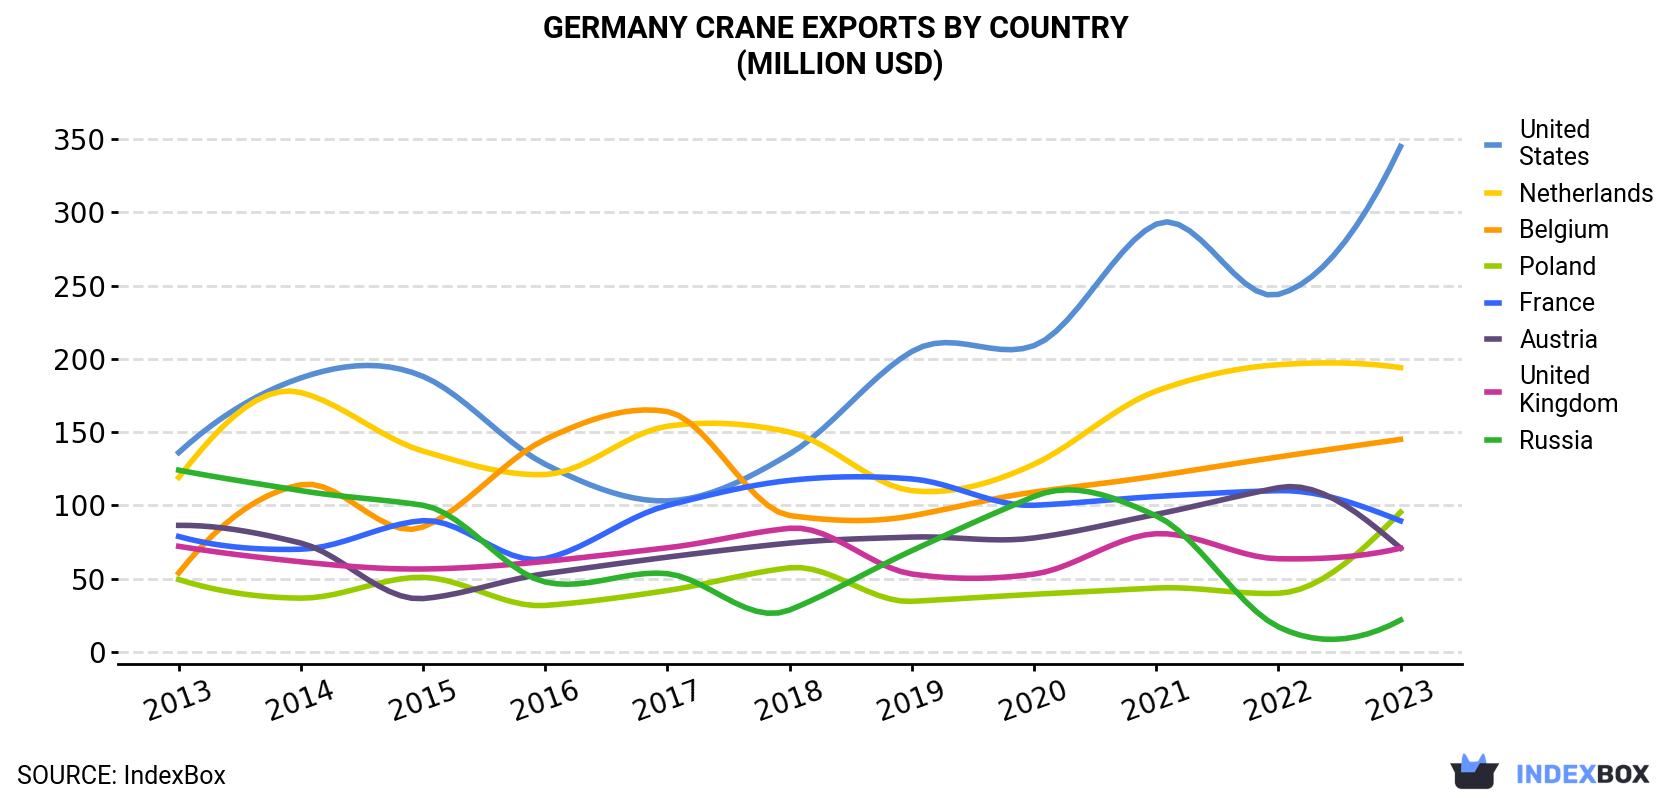 Germany Crane Exports By Country (Million USD)